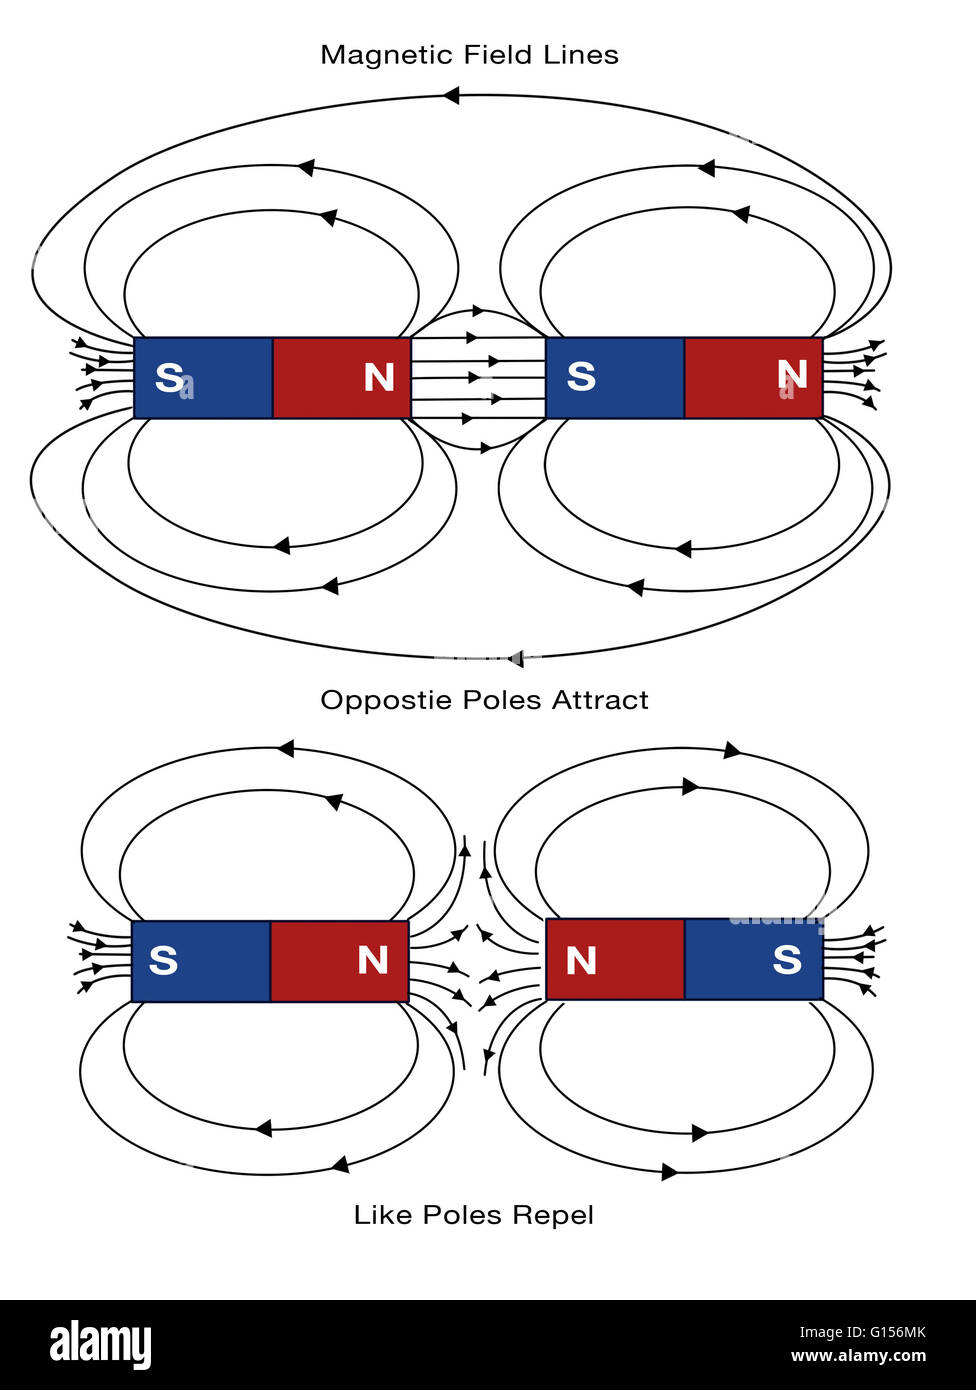 Diagram of magnetic field lines. Opposite poles attract, and like poles repel. Stock Photo